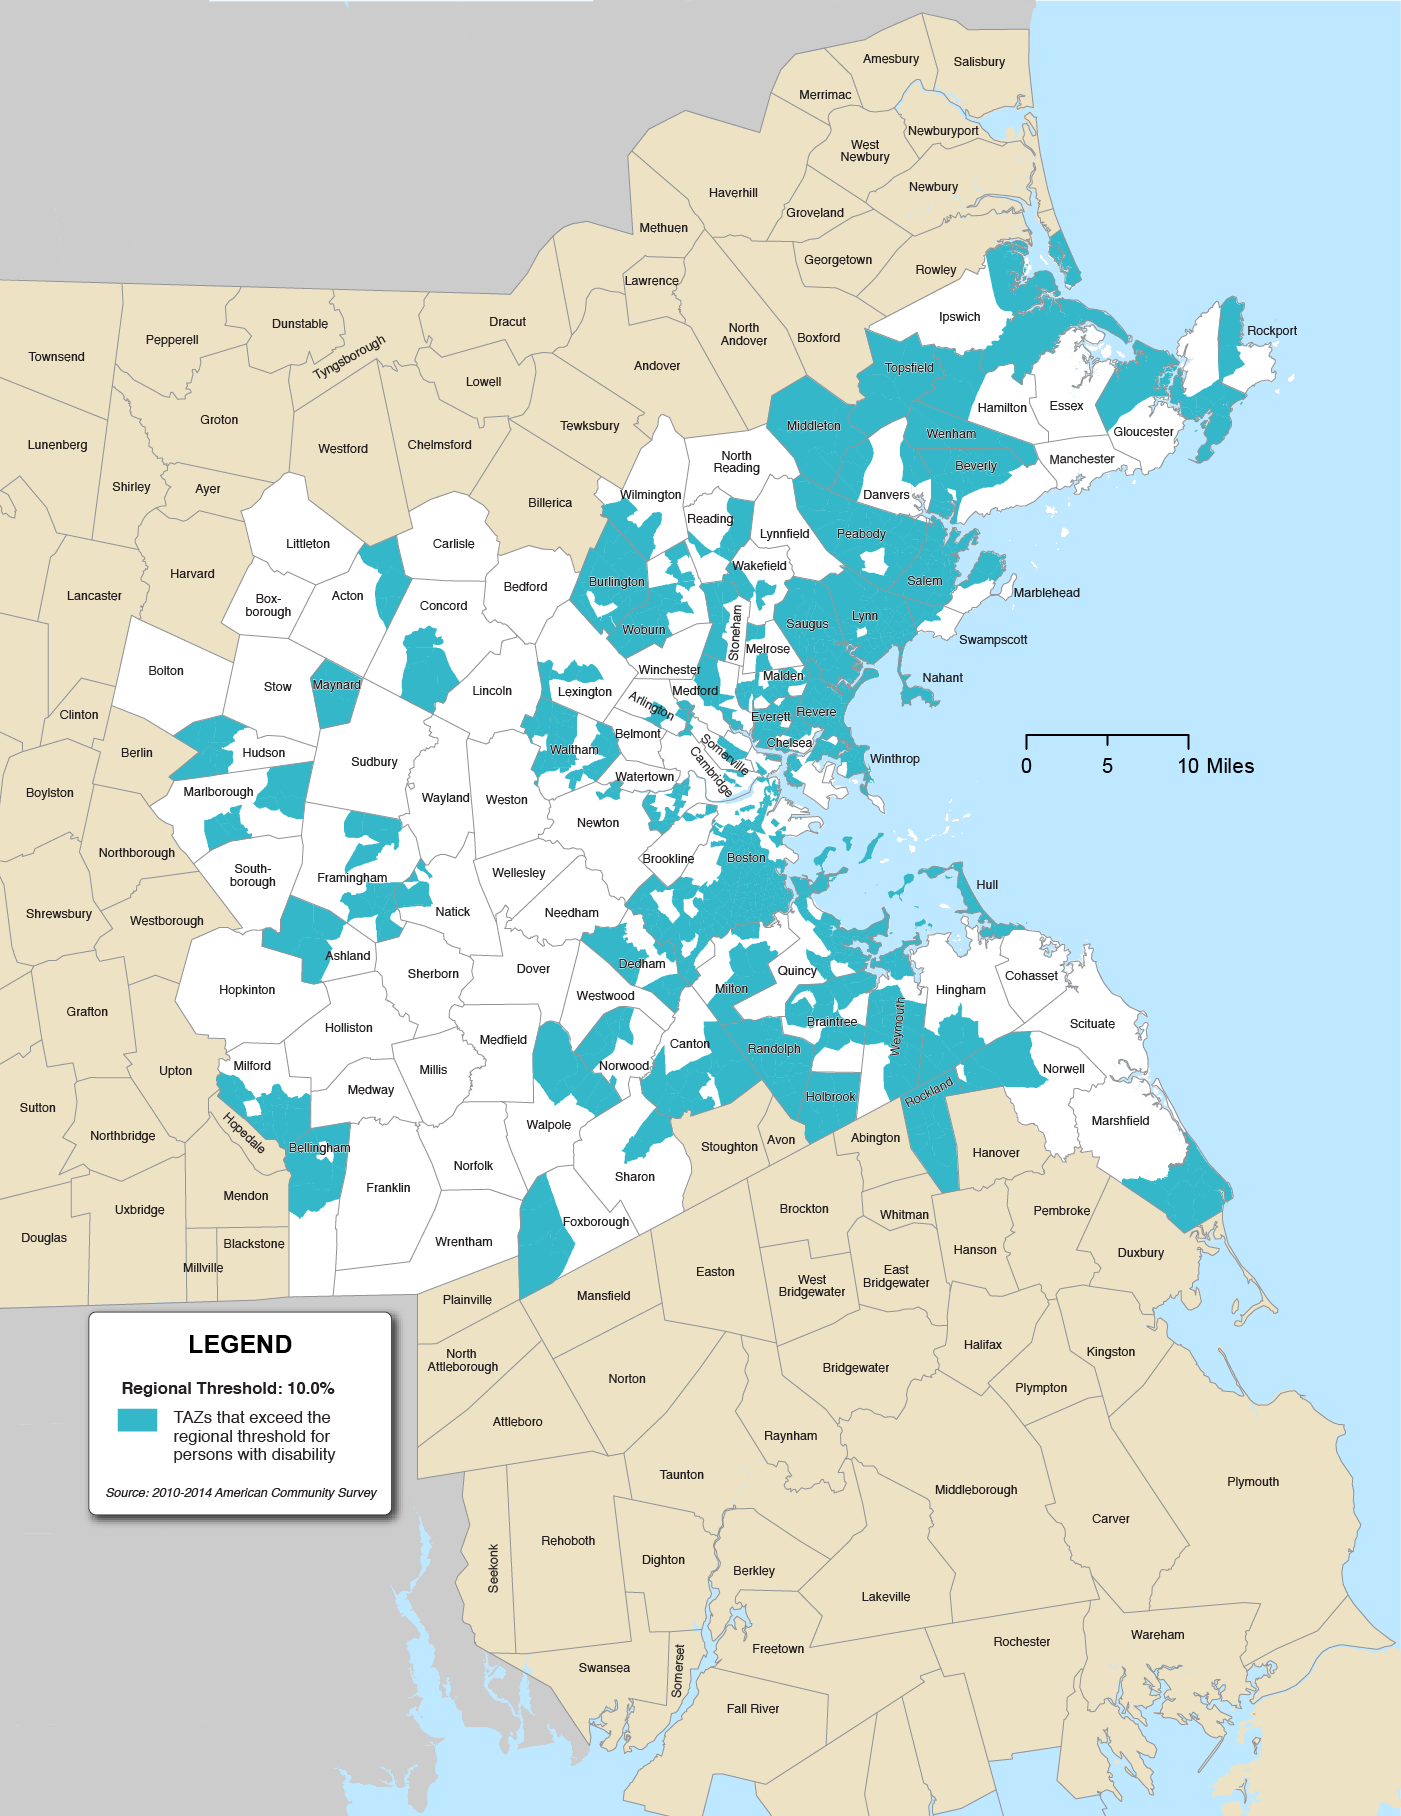 Figure 8-4 is a map of the Boston Region municipalities and the TAZs that exceed the regional threshold for people with a disability highlighted in teal. The Regional Threshold is 10.0%.